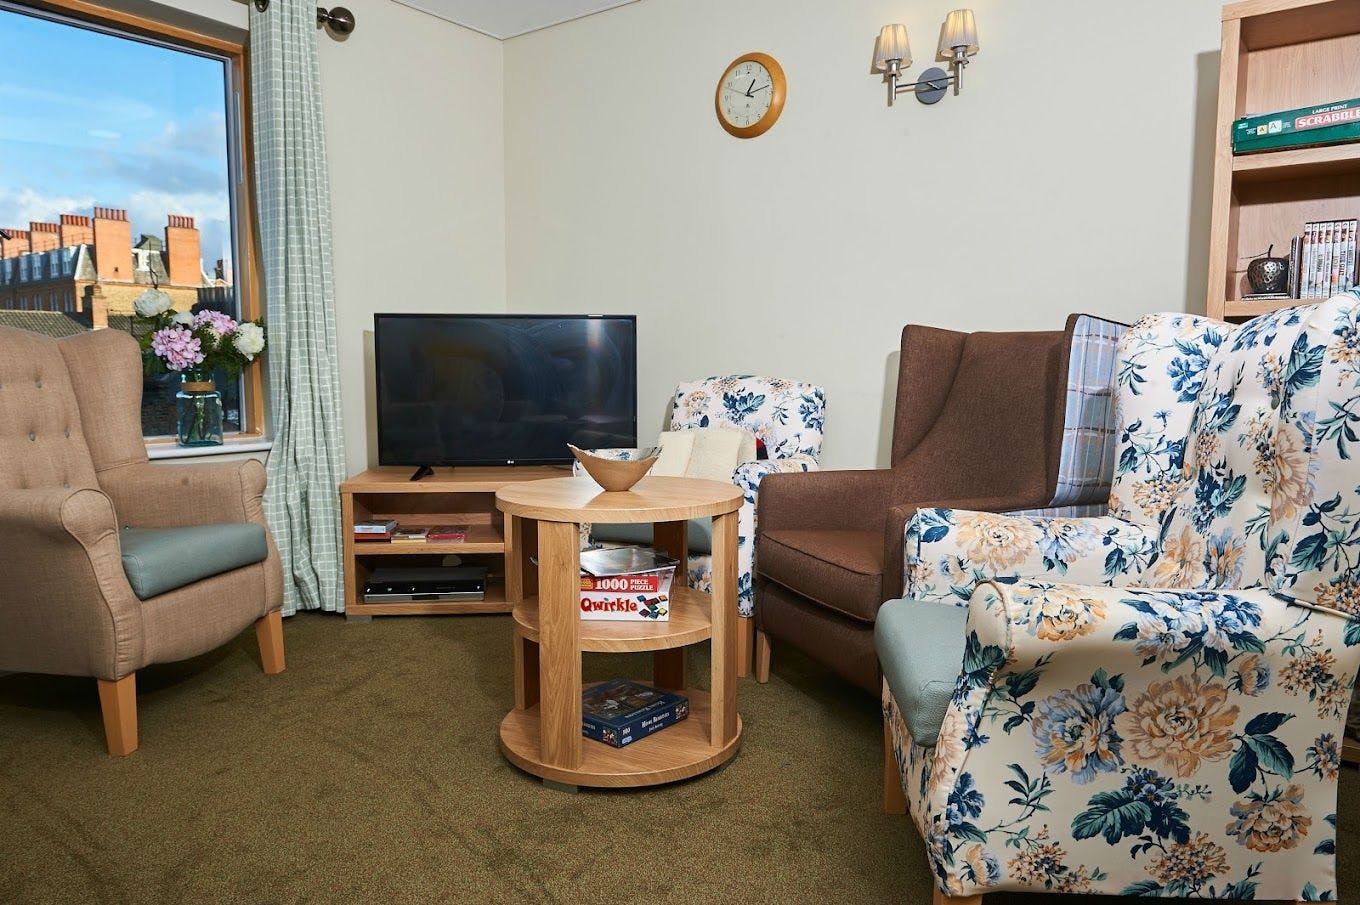 Lounge of Ellesmere House care home in Kensington and Chelsea, London